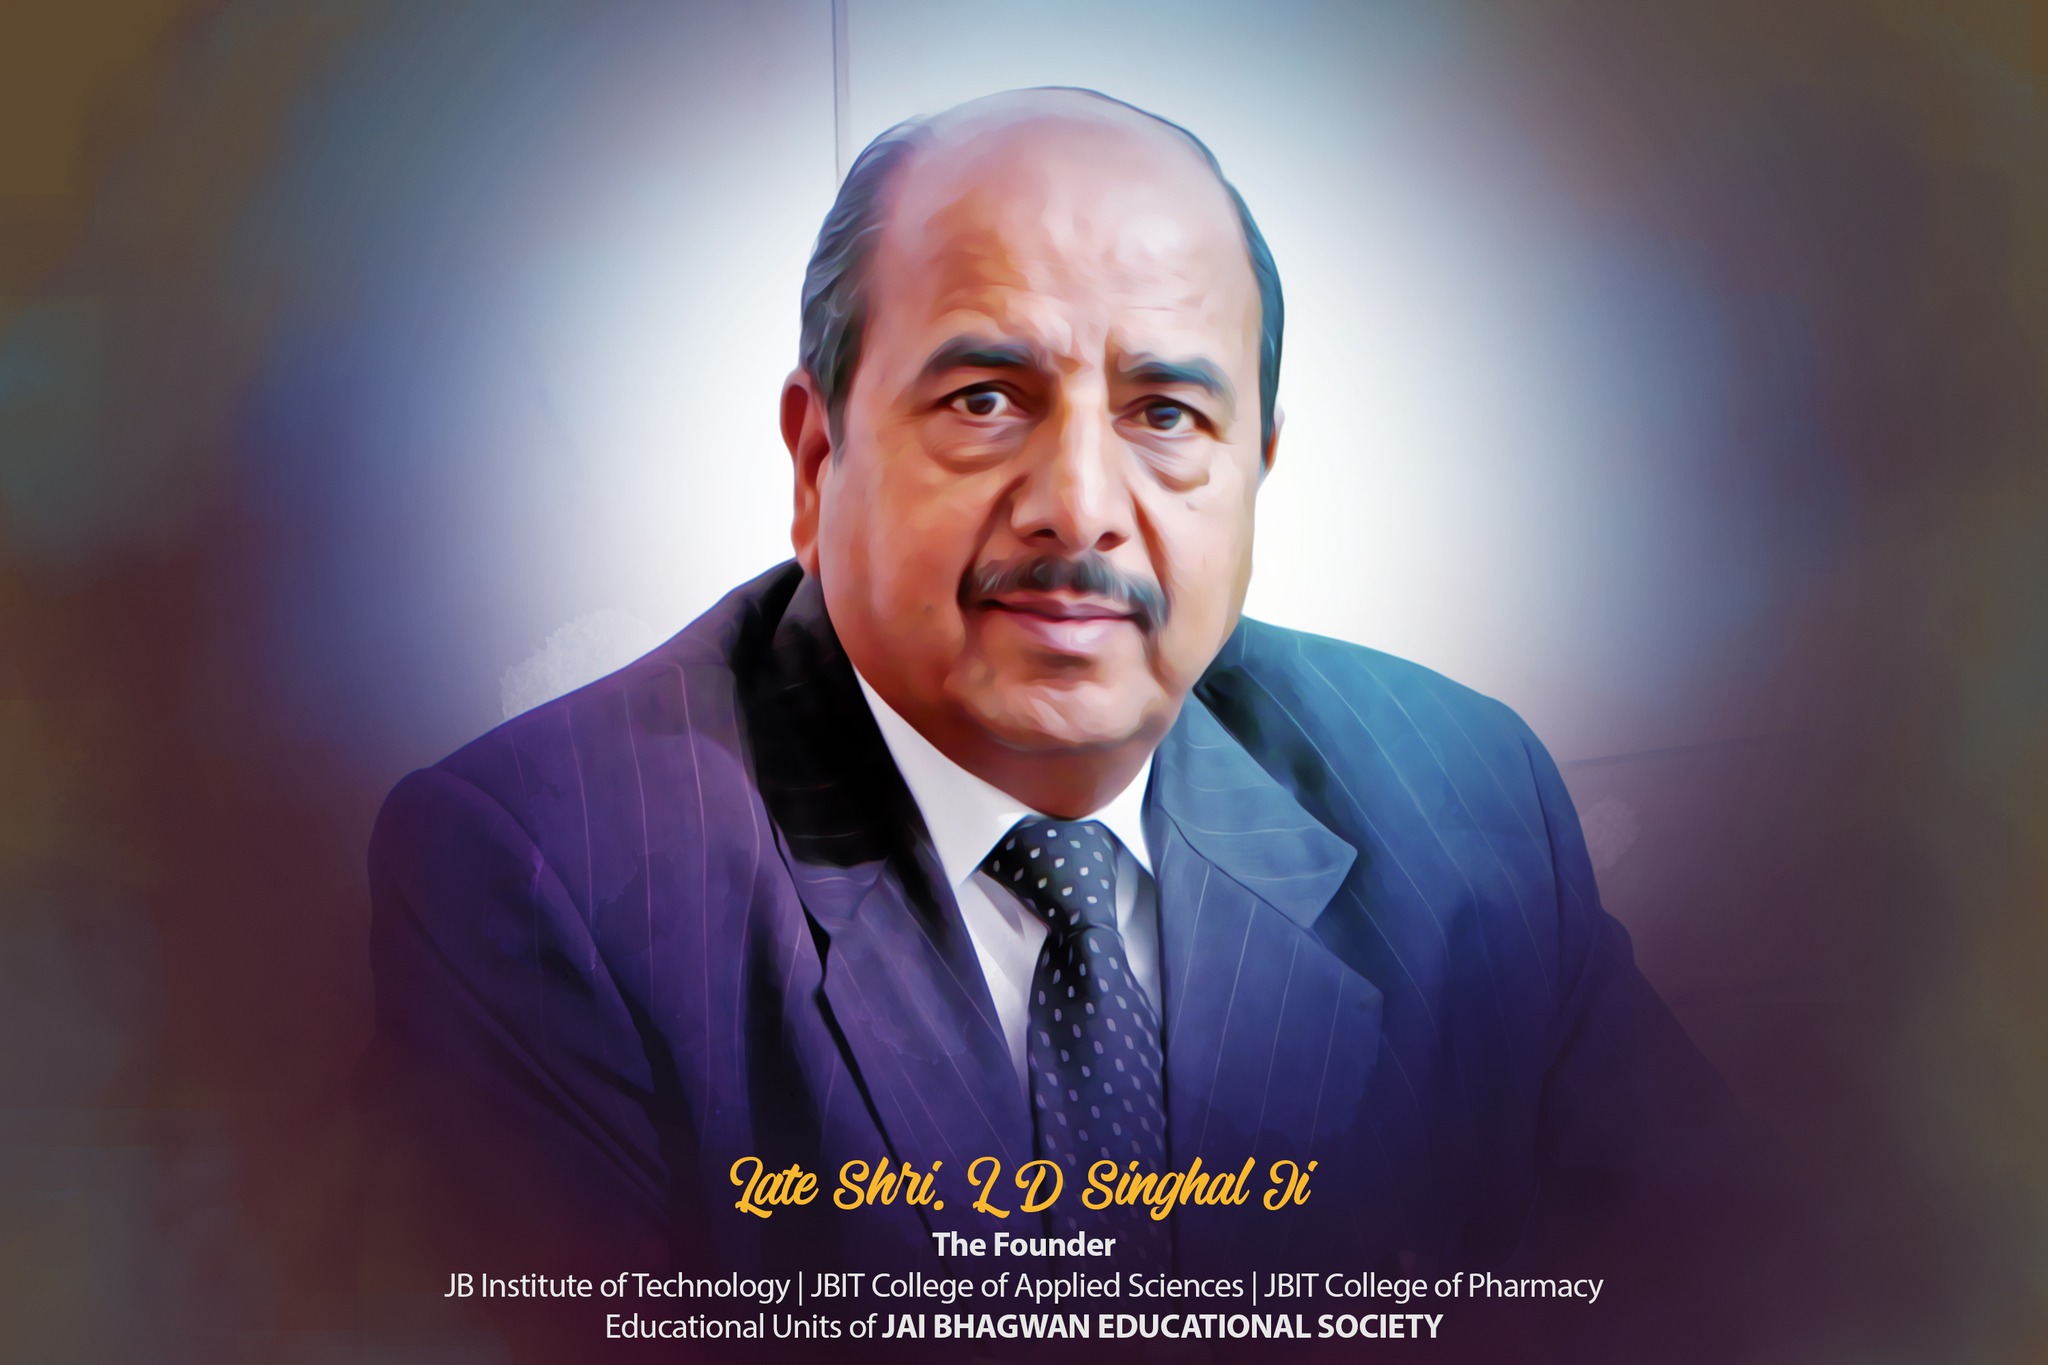 Late Shri L. D. Singhal Ji is the Founder Chairman of JBIT Group of Institutions comprised of JB Institute of Technology (